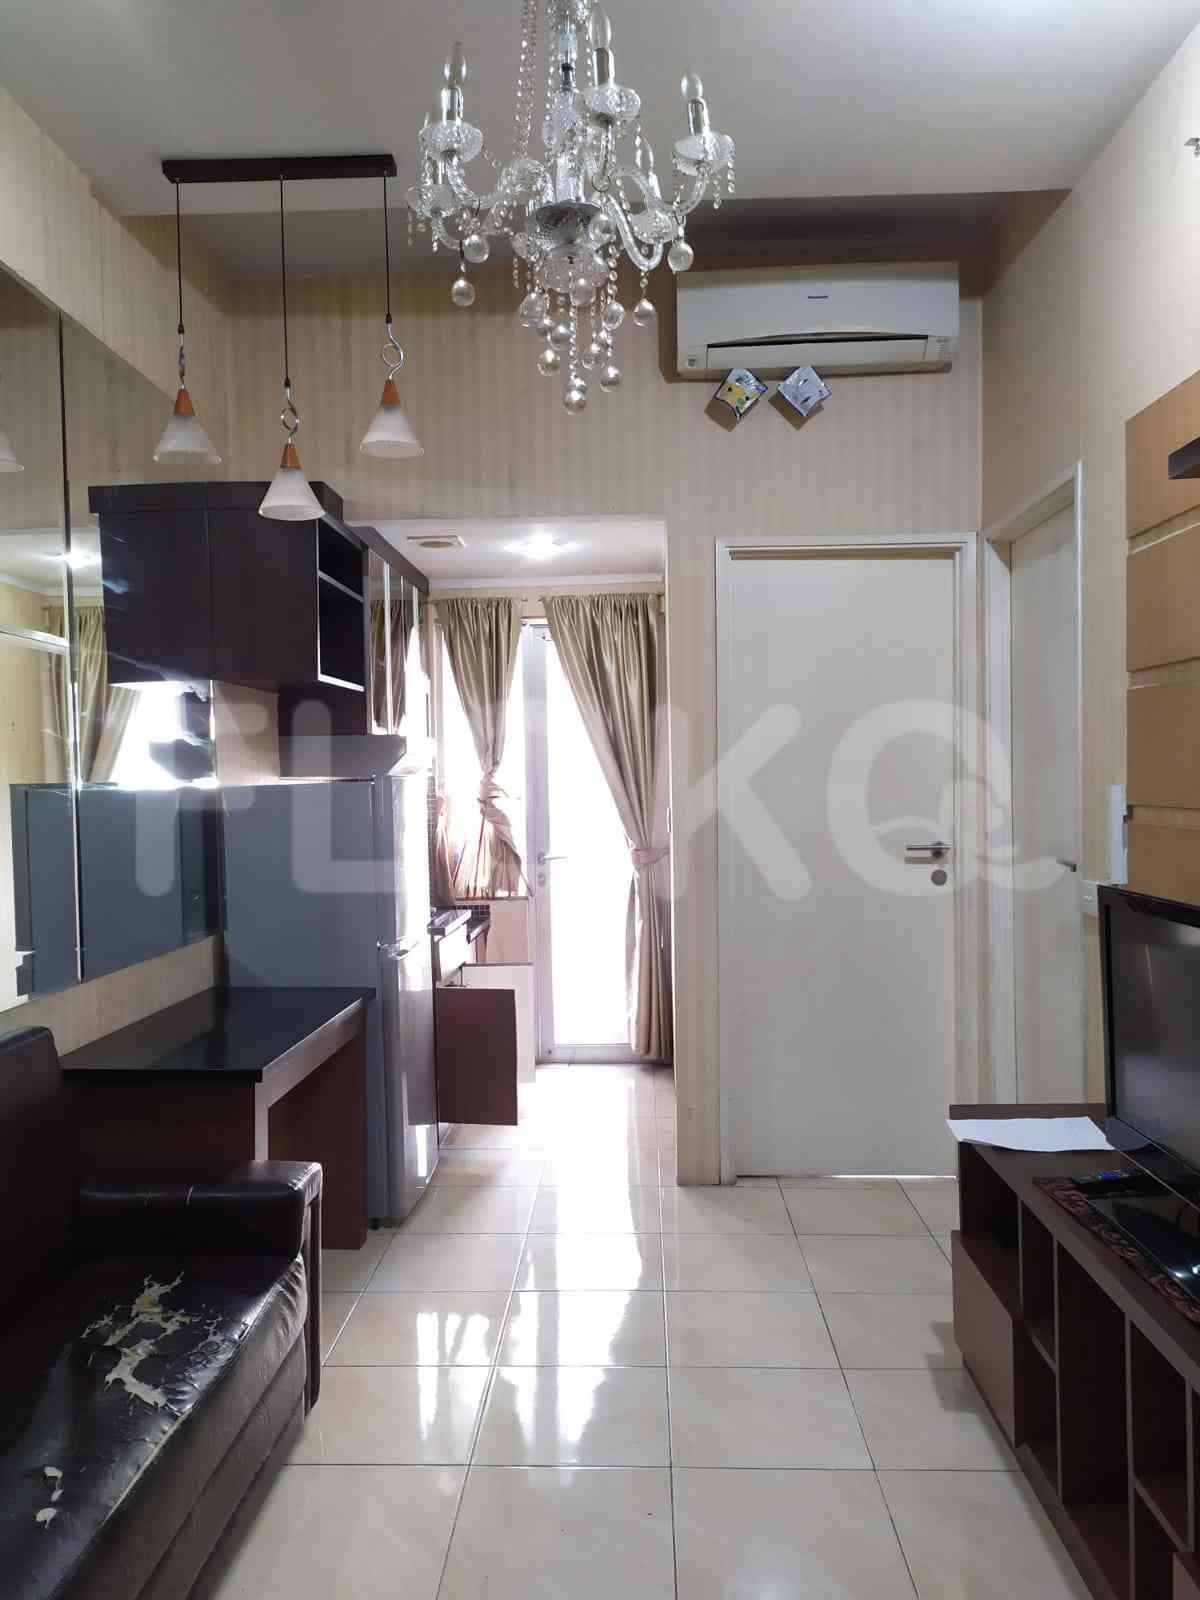 2 Bedroom on 16th Floor for Rent in Seasons City Apartment - fgrd17 2